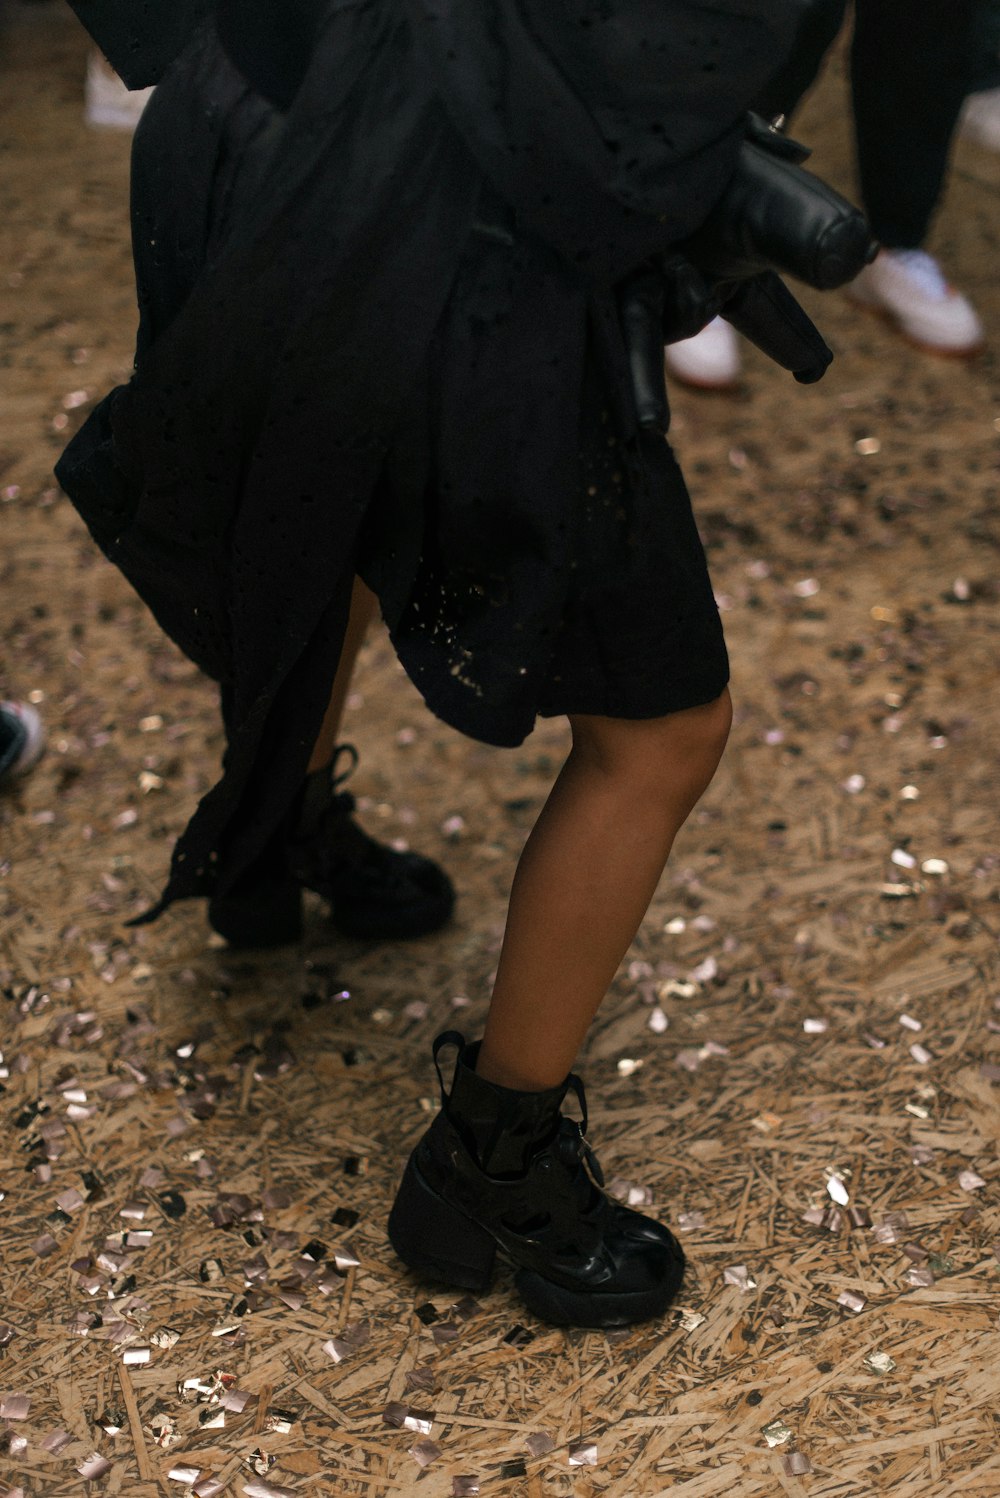 a person in a black outfit and black shoes